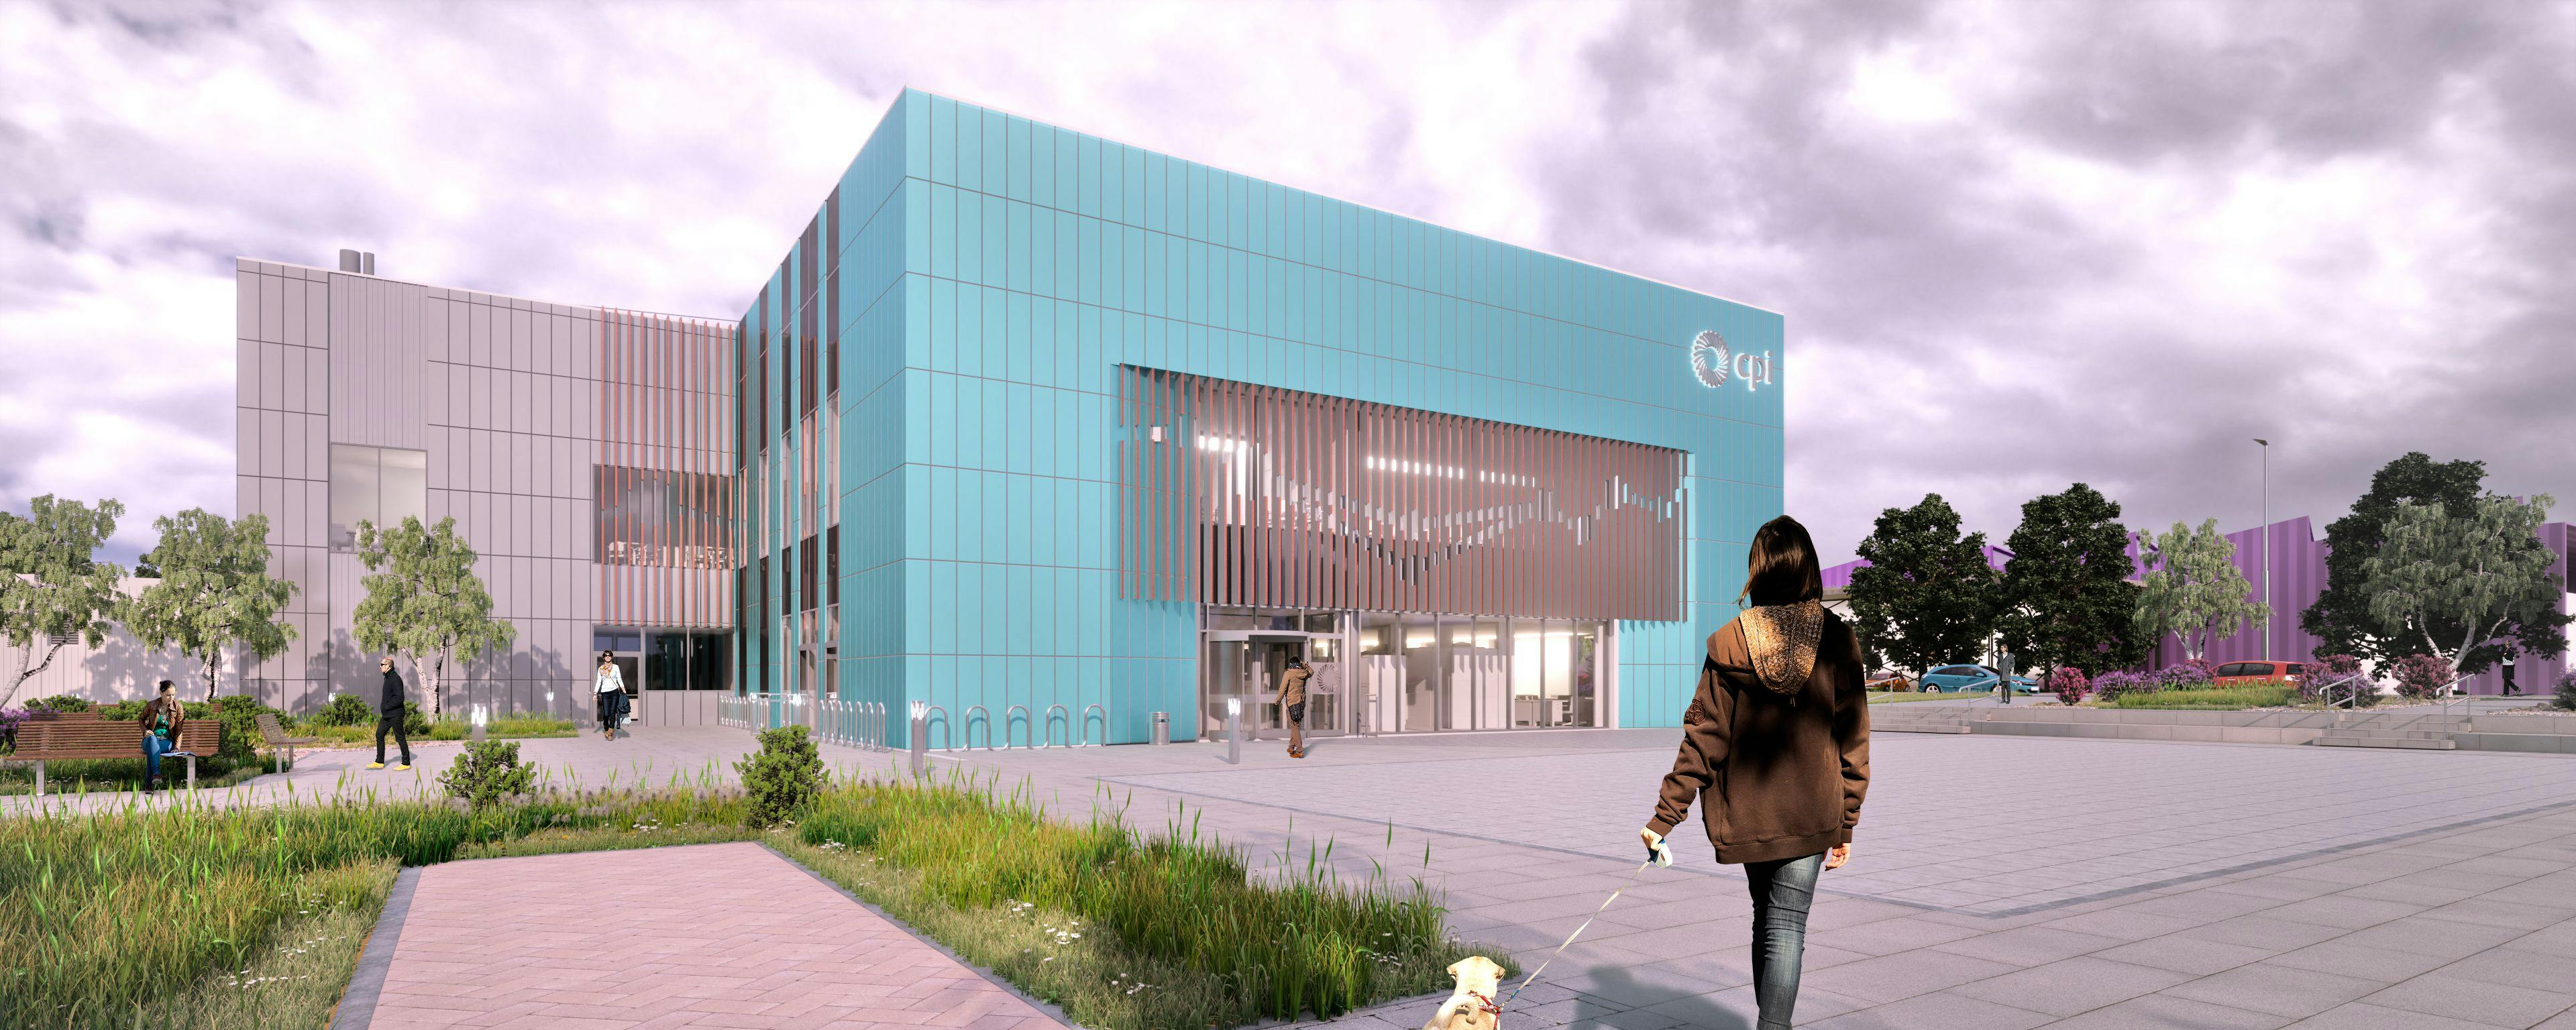 Artist’s rendering of the Medicines Manufacturing Innovation Centre in Renfrewshire, UK.